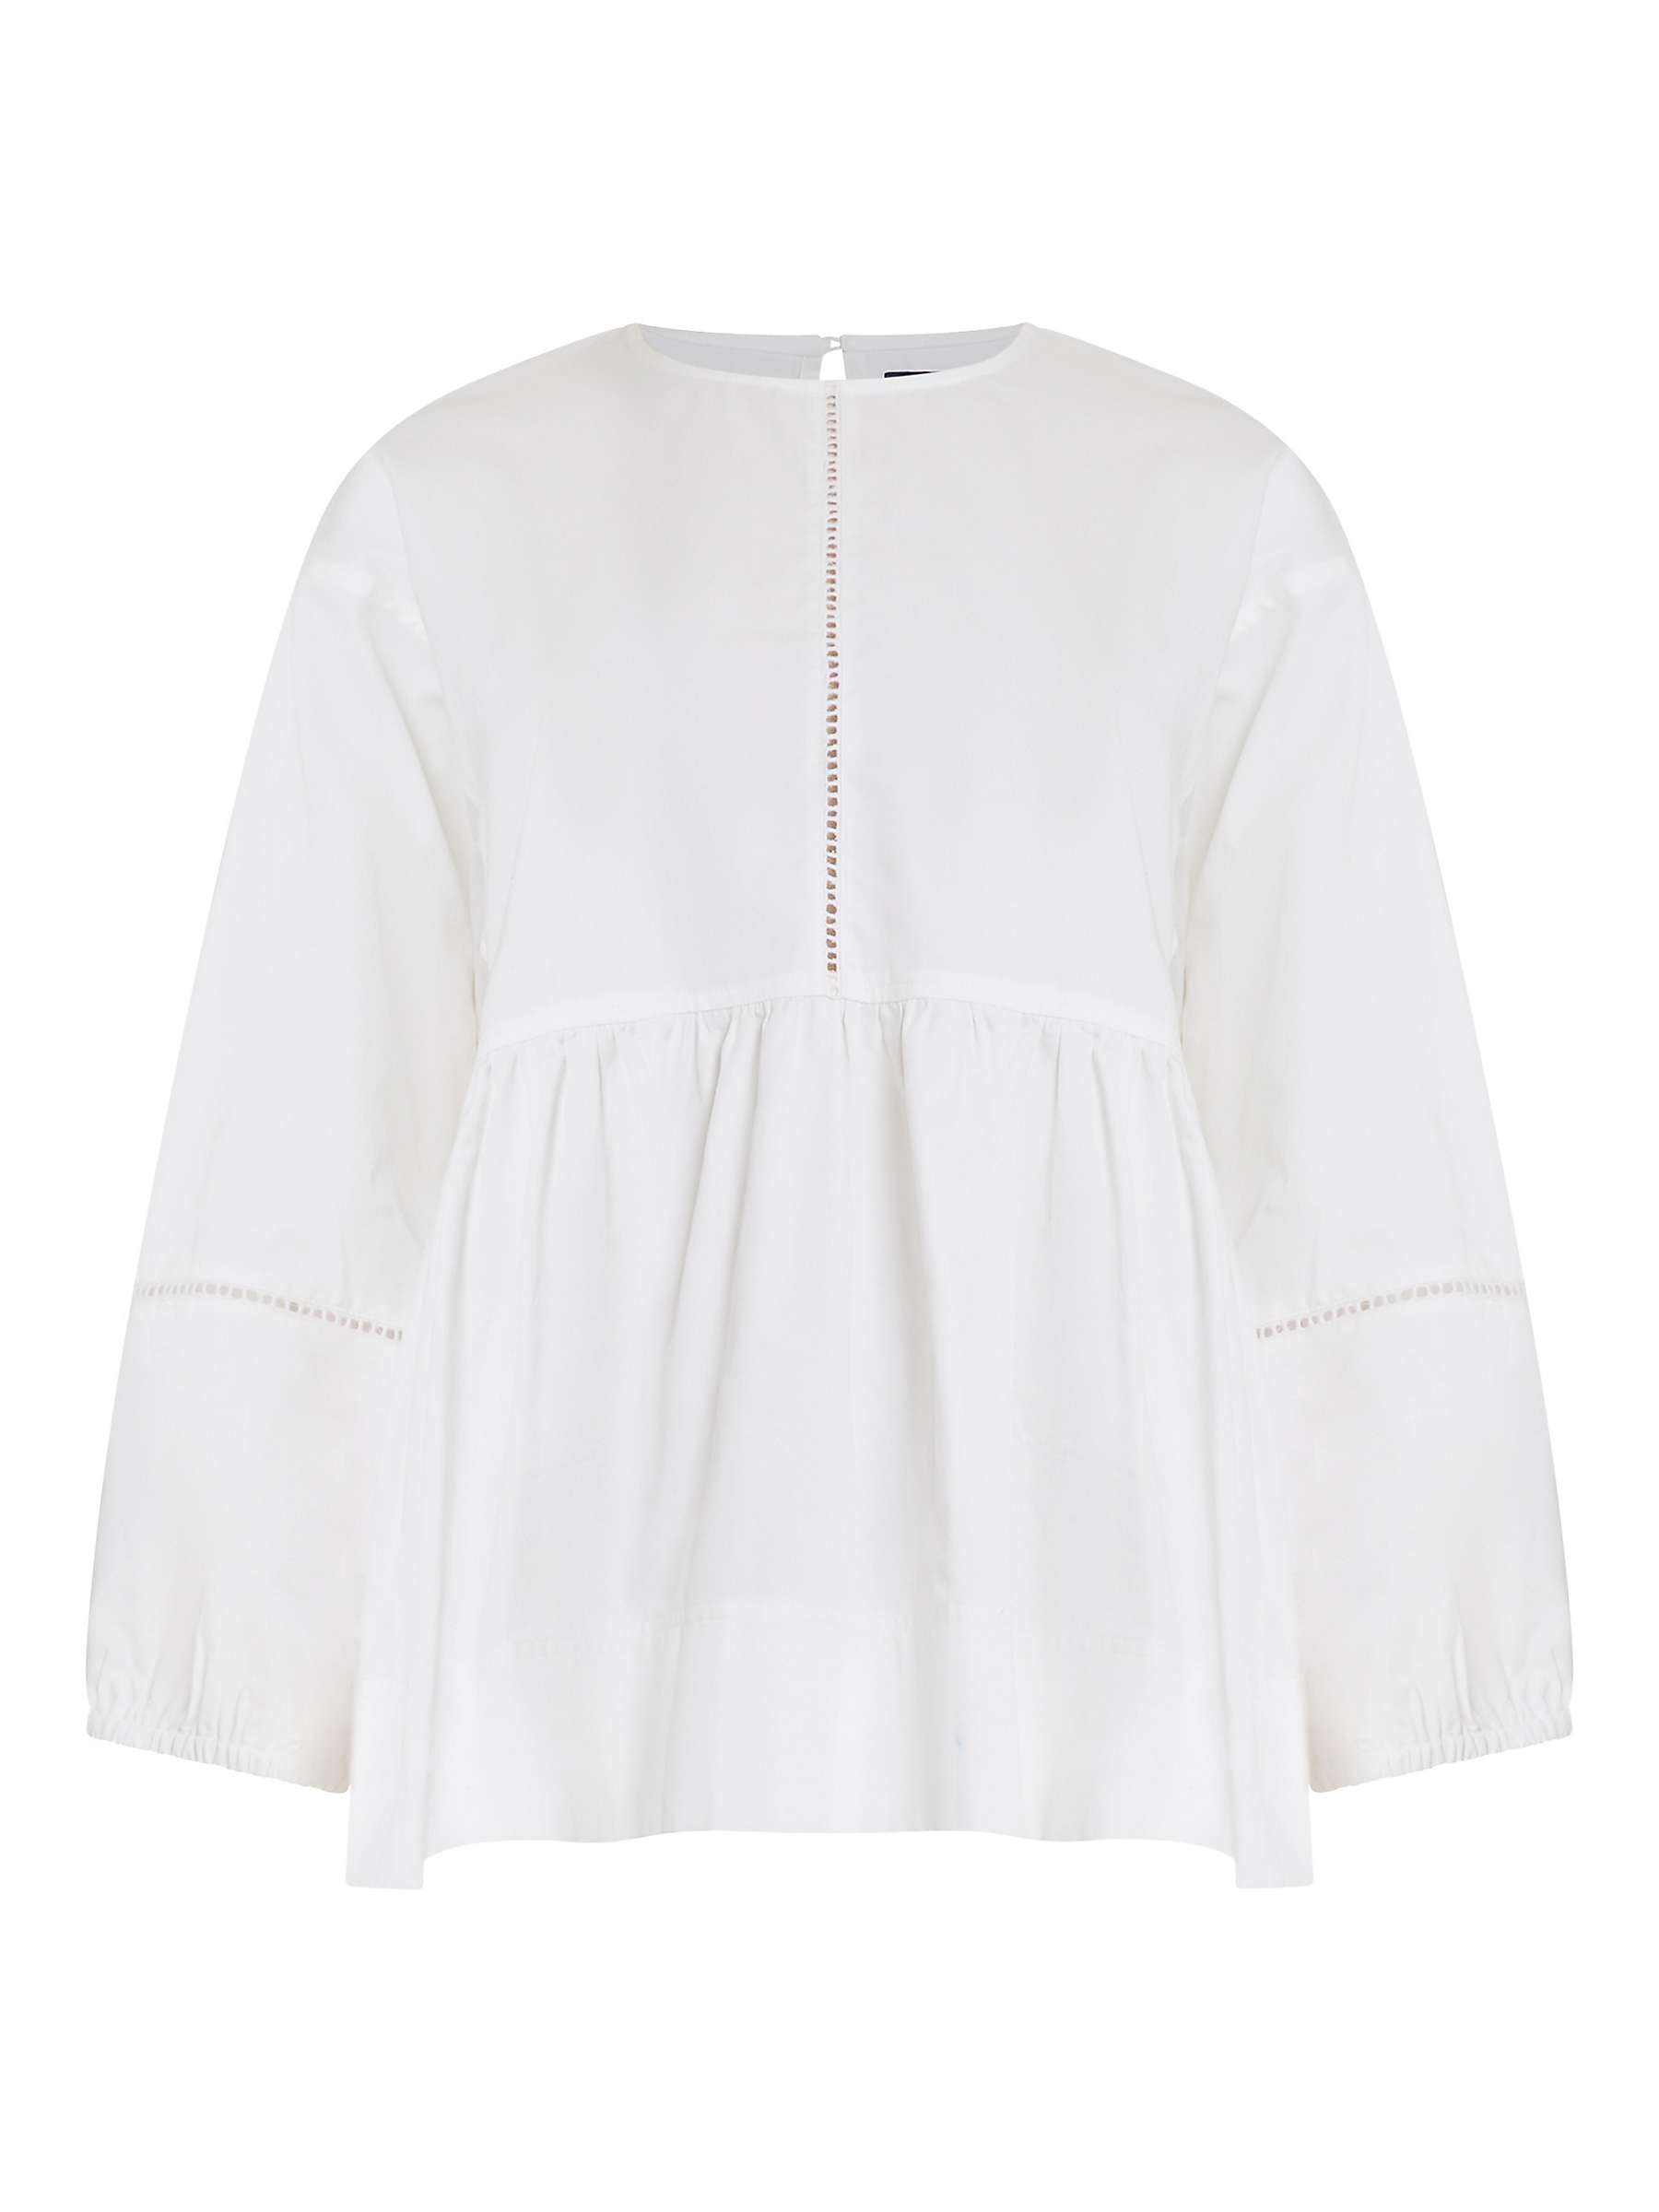 Buy French Connection Sindey Cotton Top, Winter White Online at johnlewis.com